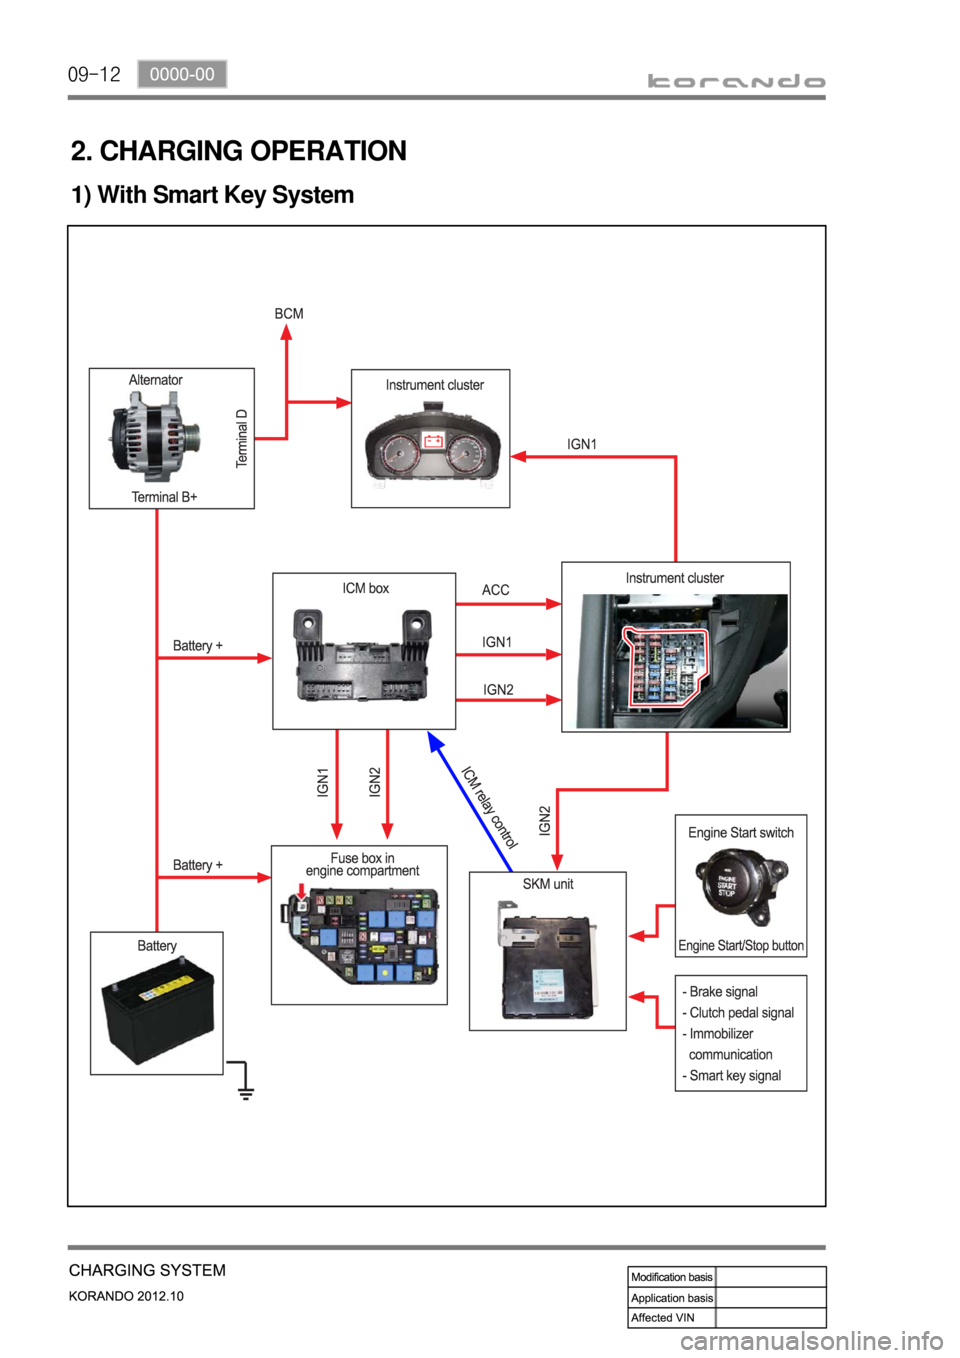 SSANGYONG KORANDO 2012  Service Manual 09-12
2. CHARGING OPERATION
1) With Smart Key System 